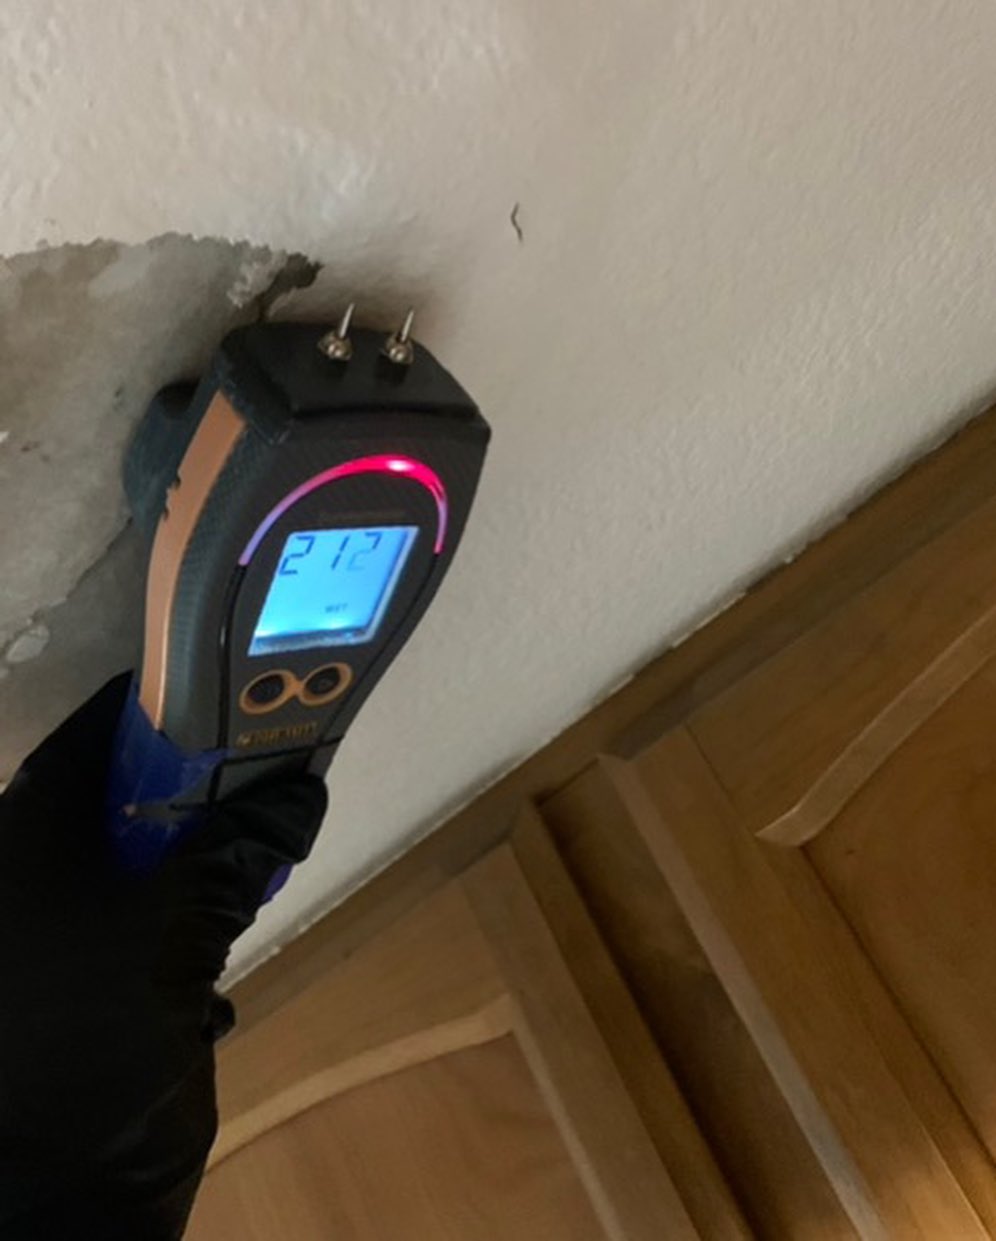 A hand holding a digital moisture meter against a damaged, peeling wall, displaying a reading of 21.2%.